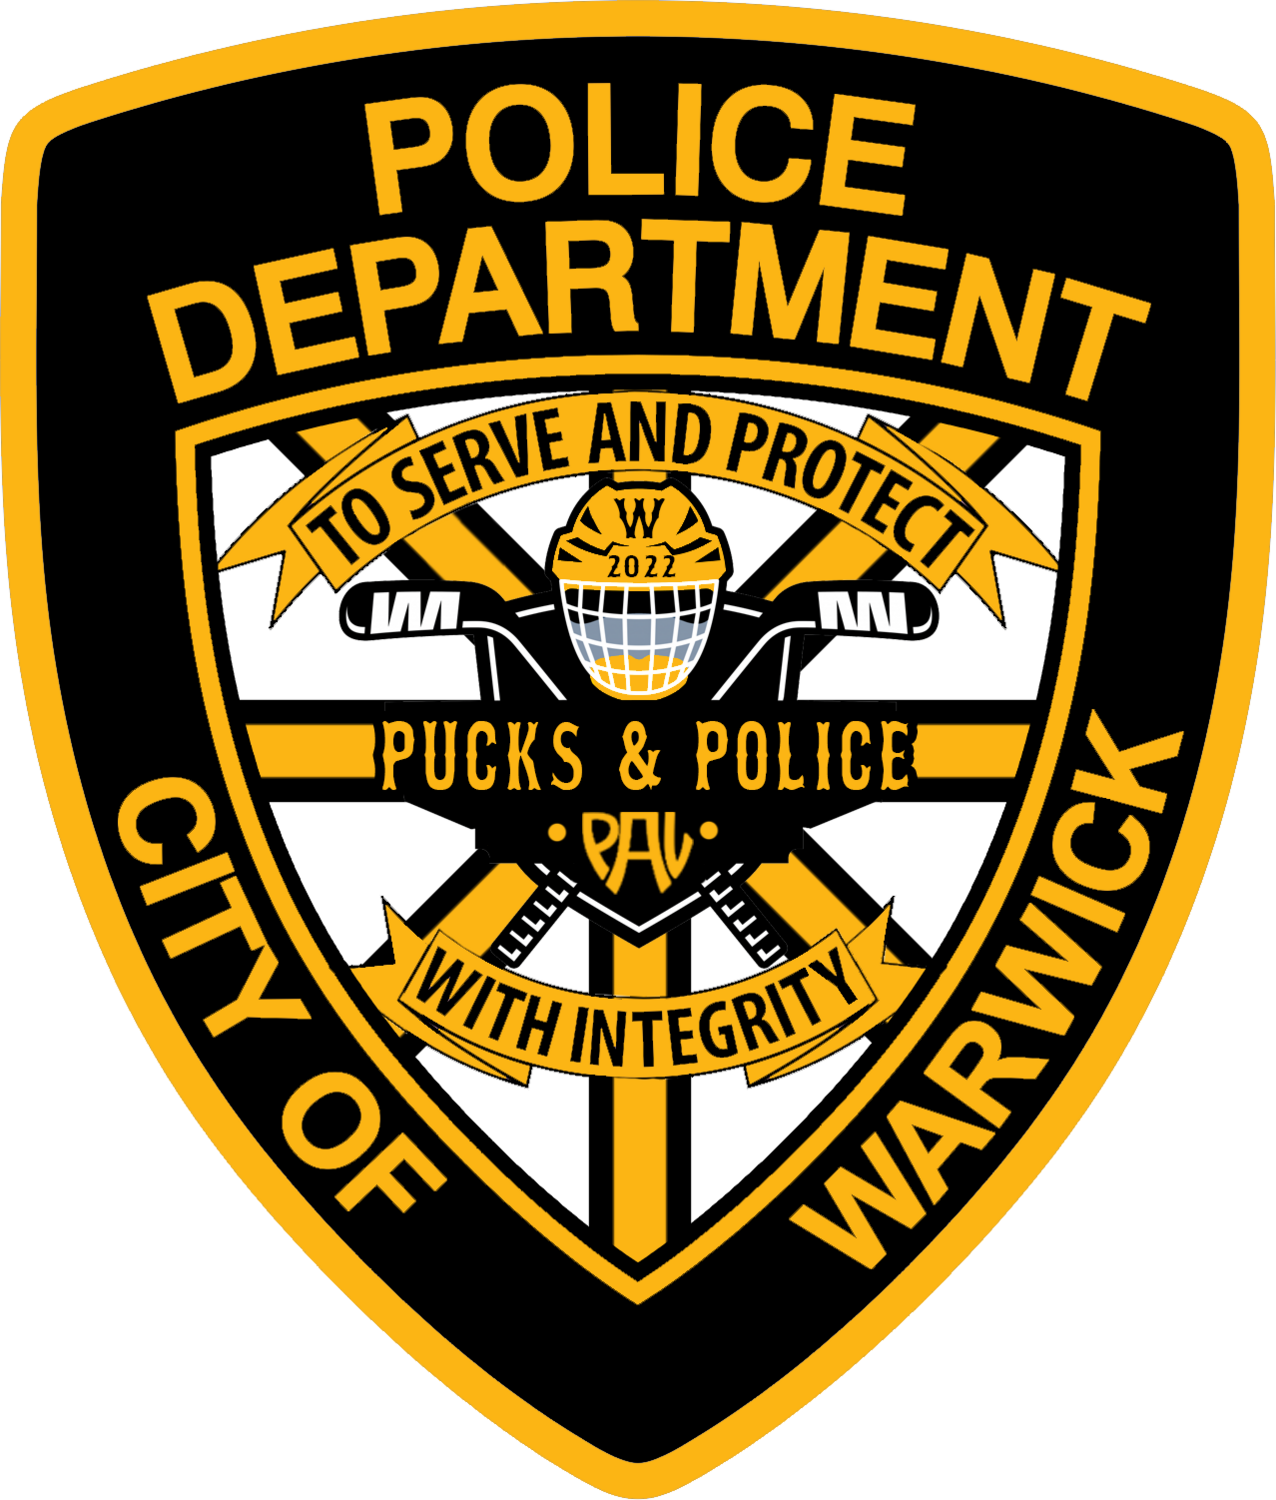 Pucks and Police